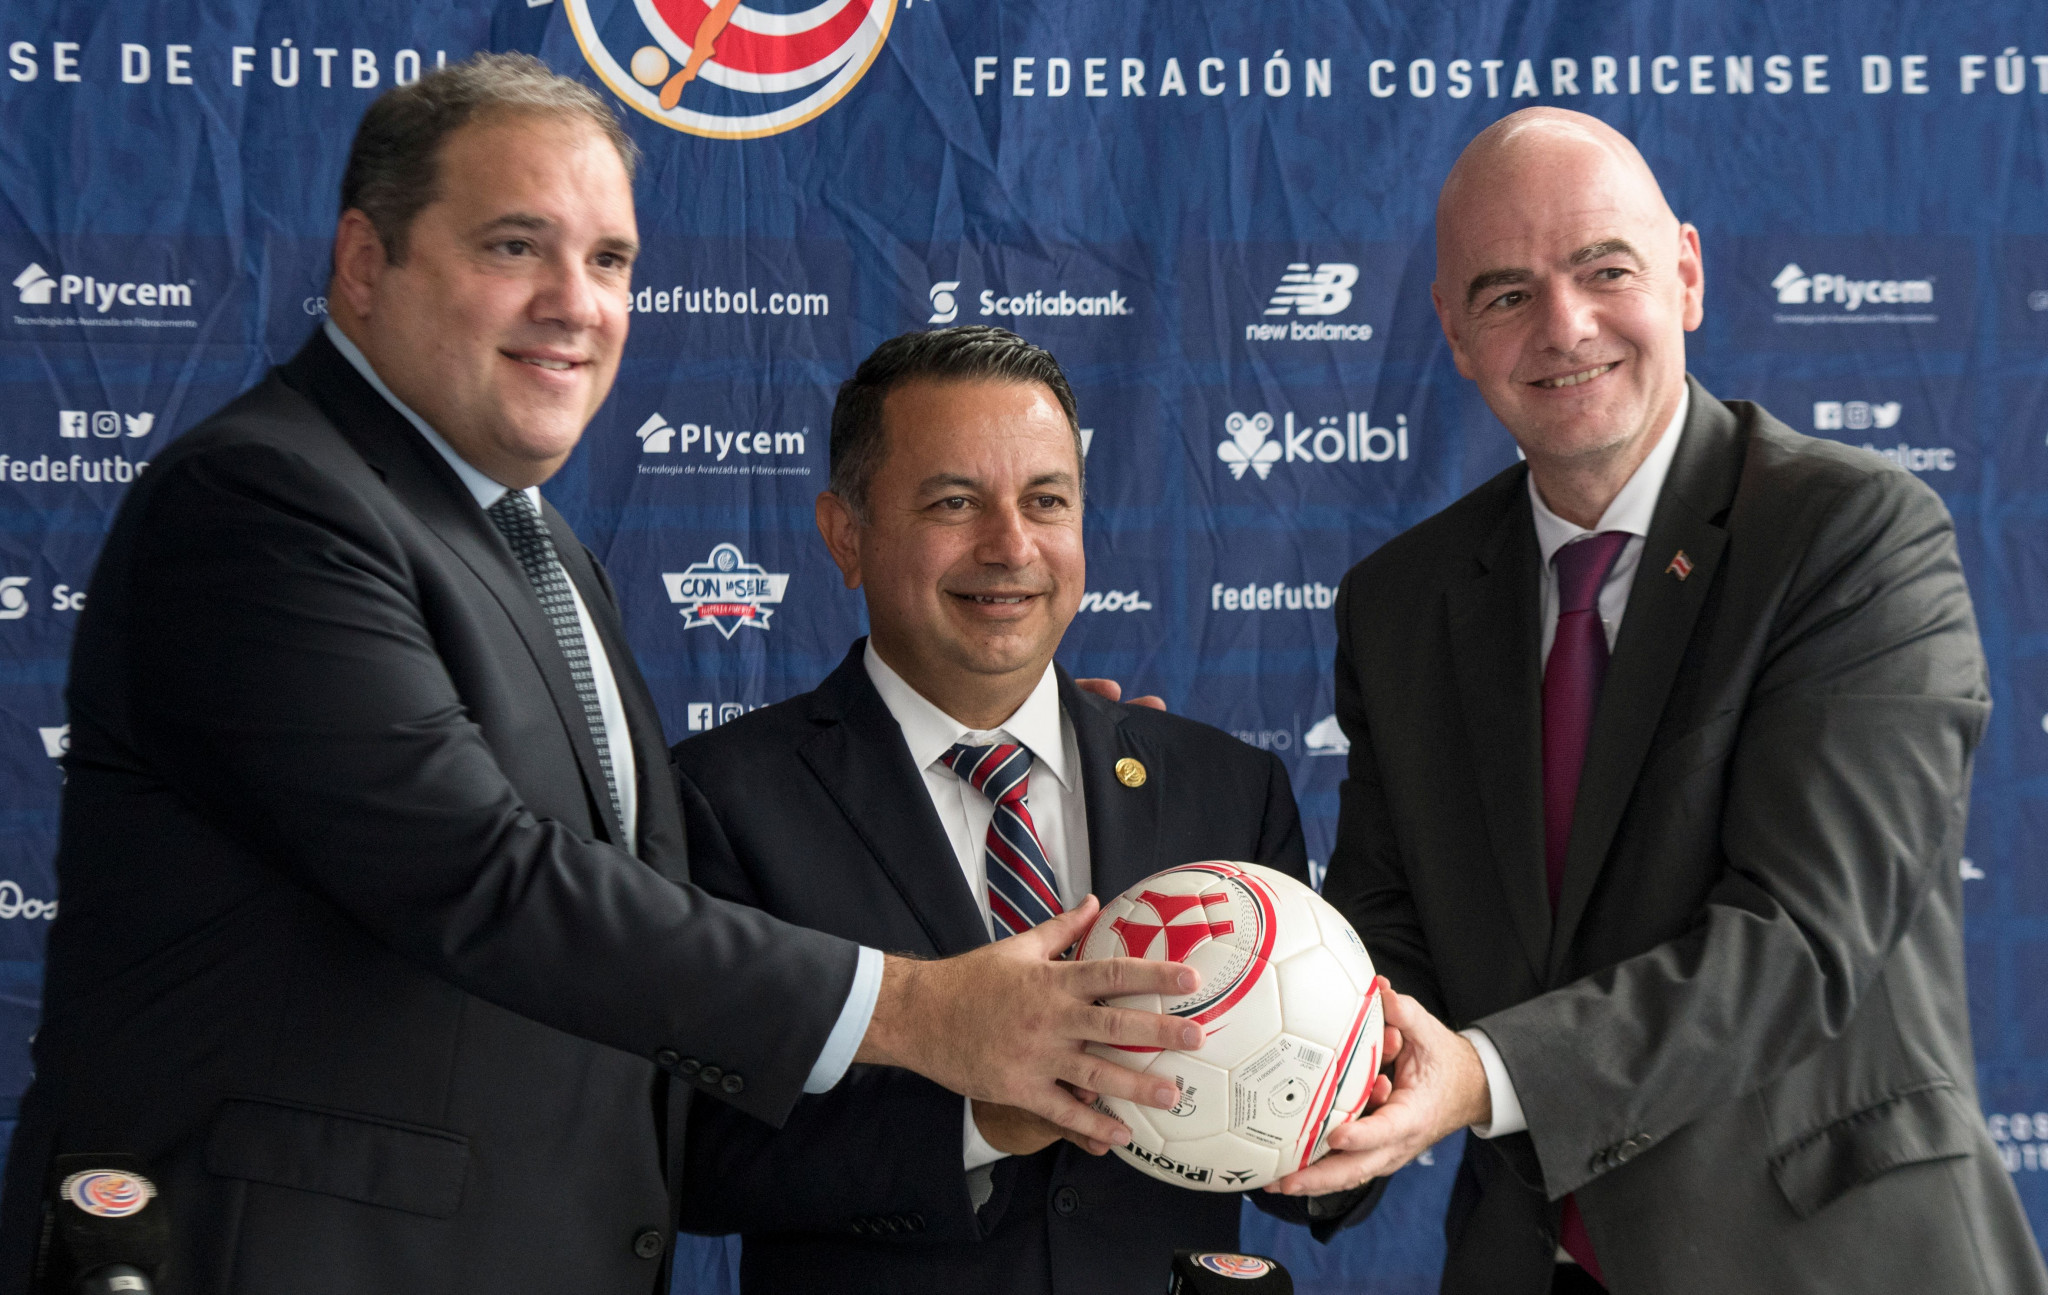 Costa Rica and Panama to host FIFA Under-20 Women’s World Cup in 2020